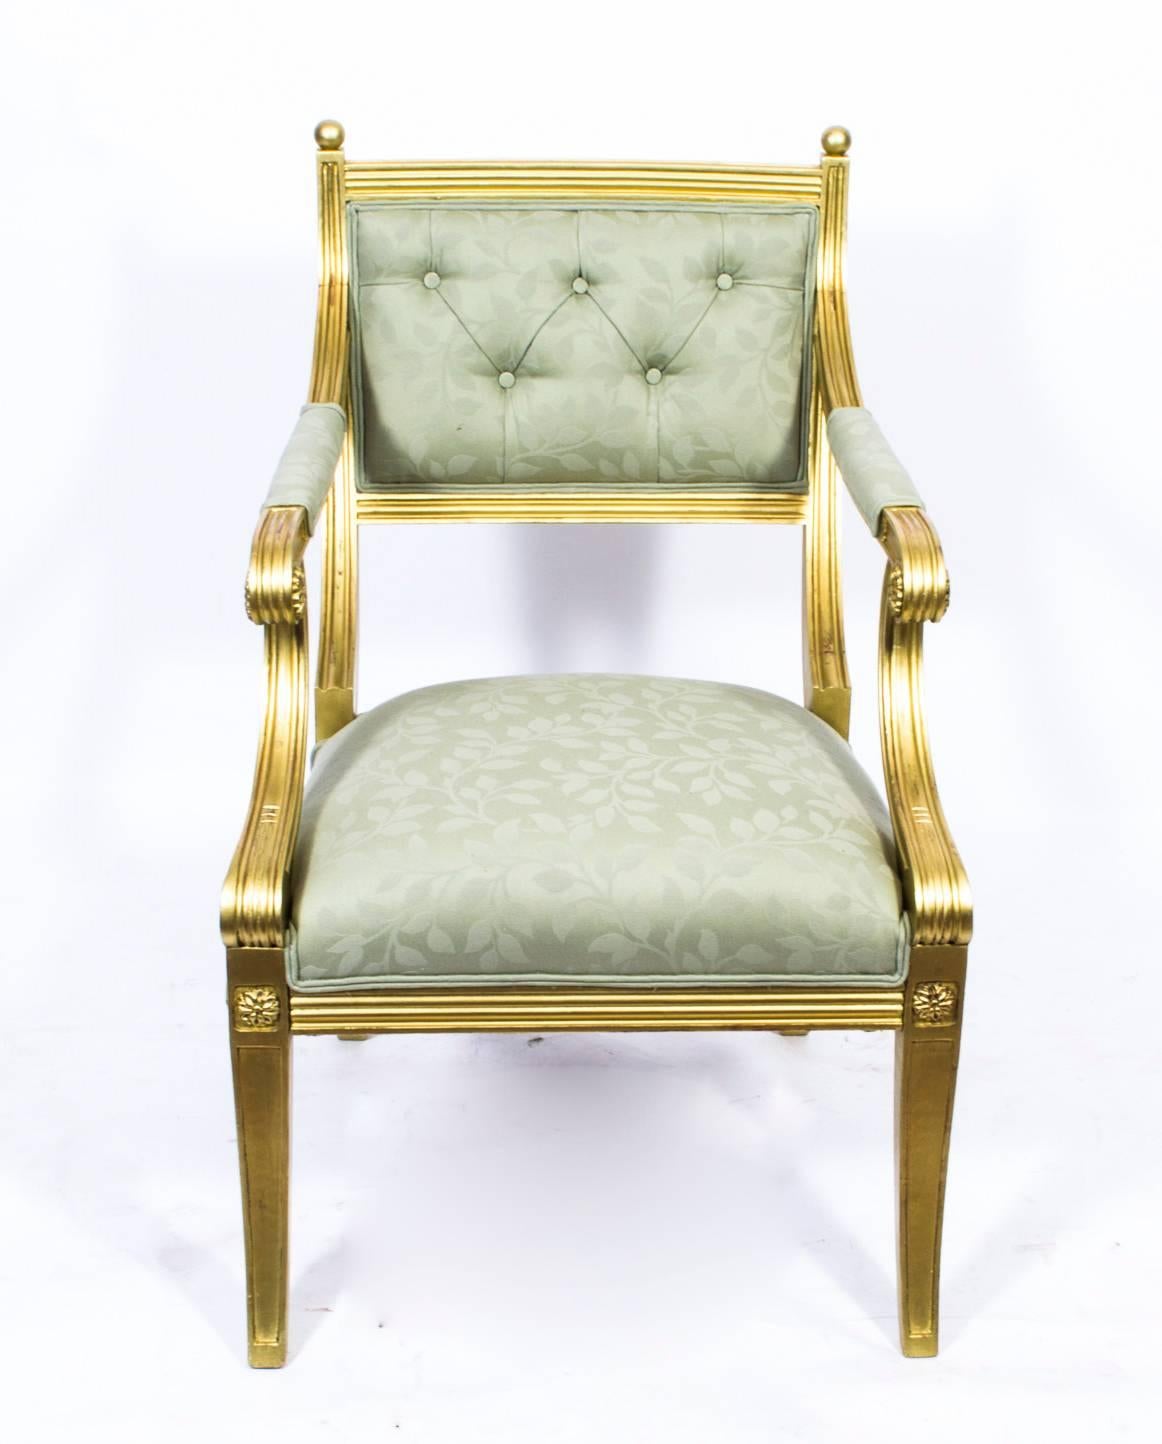 This is a beautiful antique giltwood armchair, in the fabulous Regency style, and early 20th century in date. 

The gilded chair has been beautifully carved with reeded lines and medallion plaques. The arms and supports scroll out in exaggerated